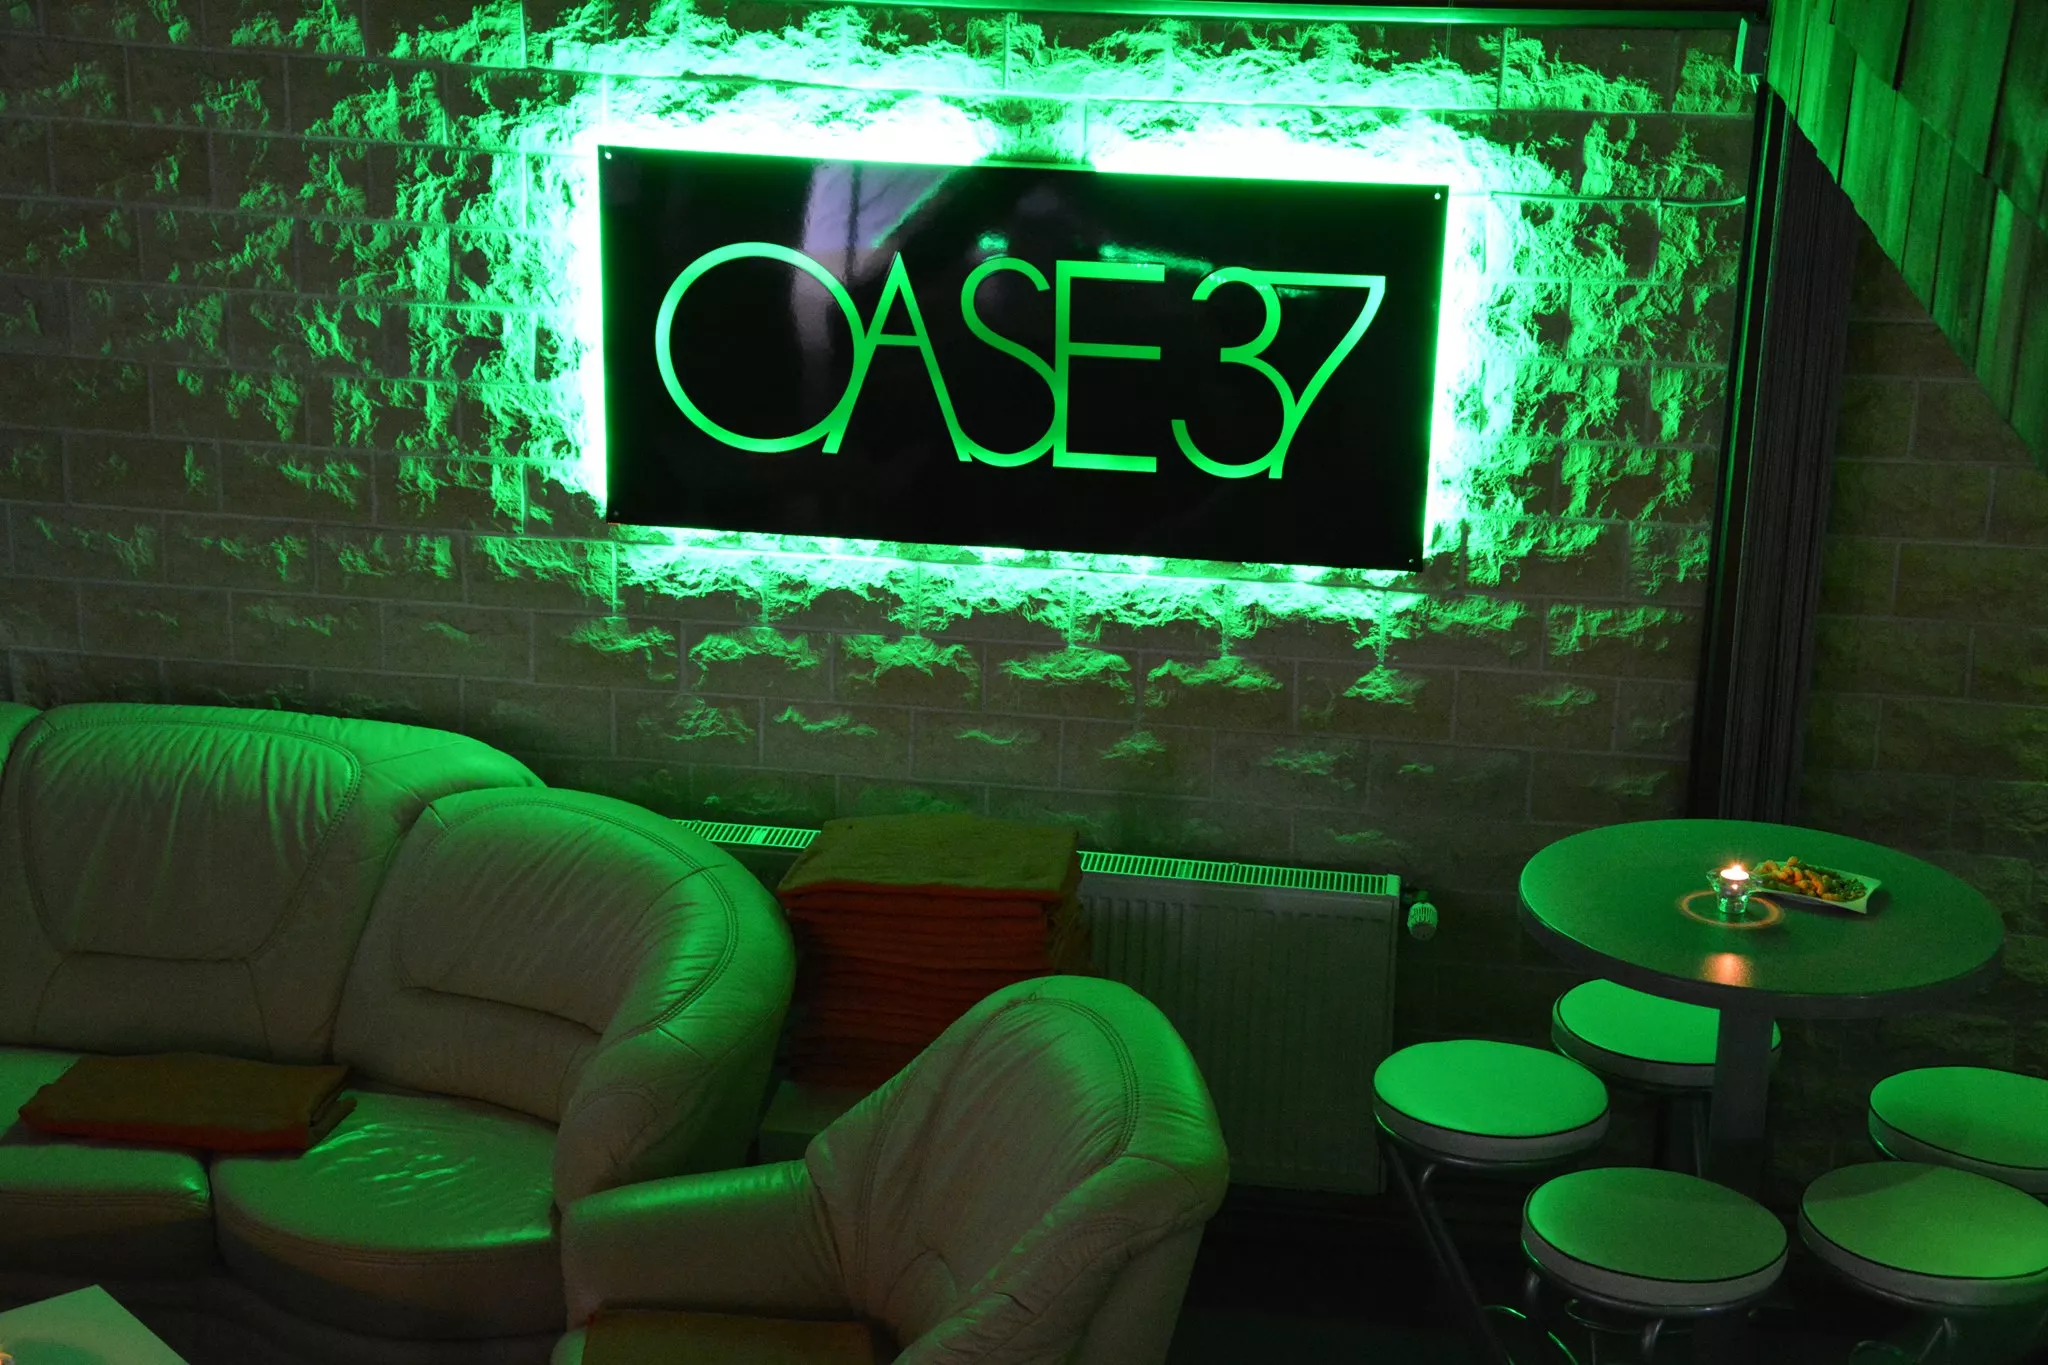 Oase37 in Germany, Europe  - Rated 0.6